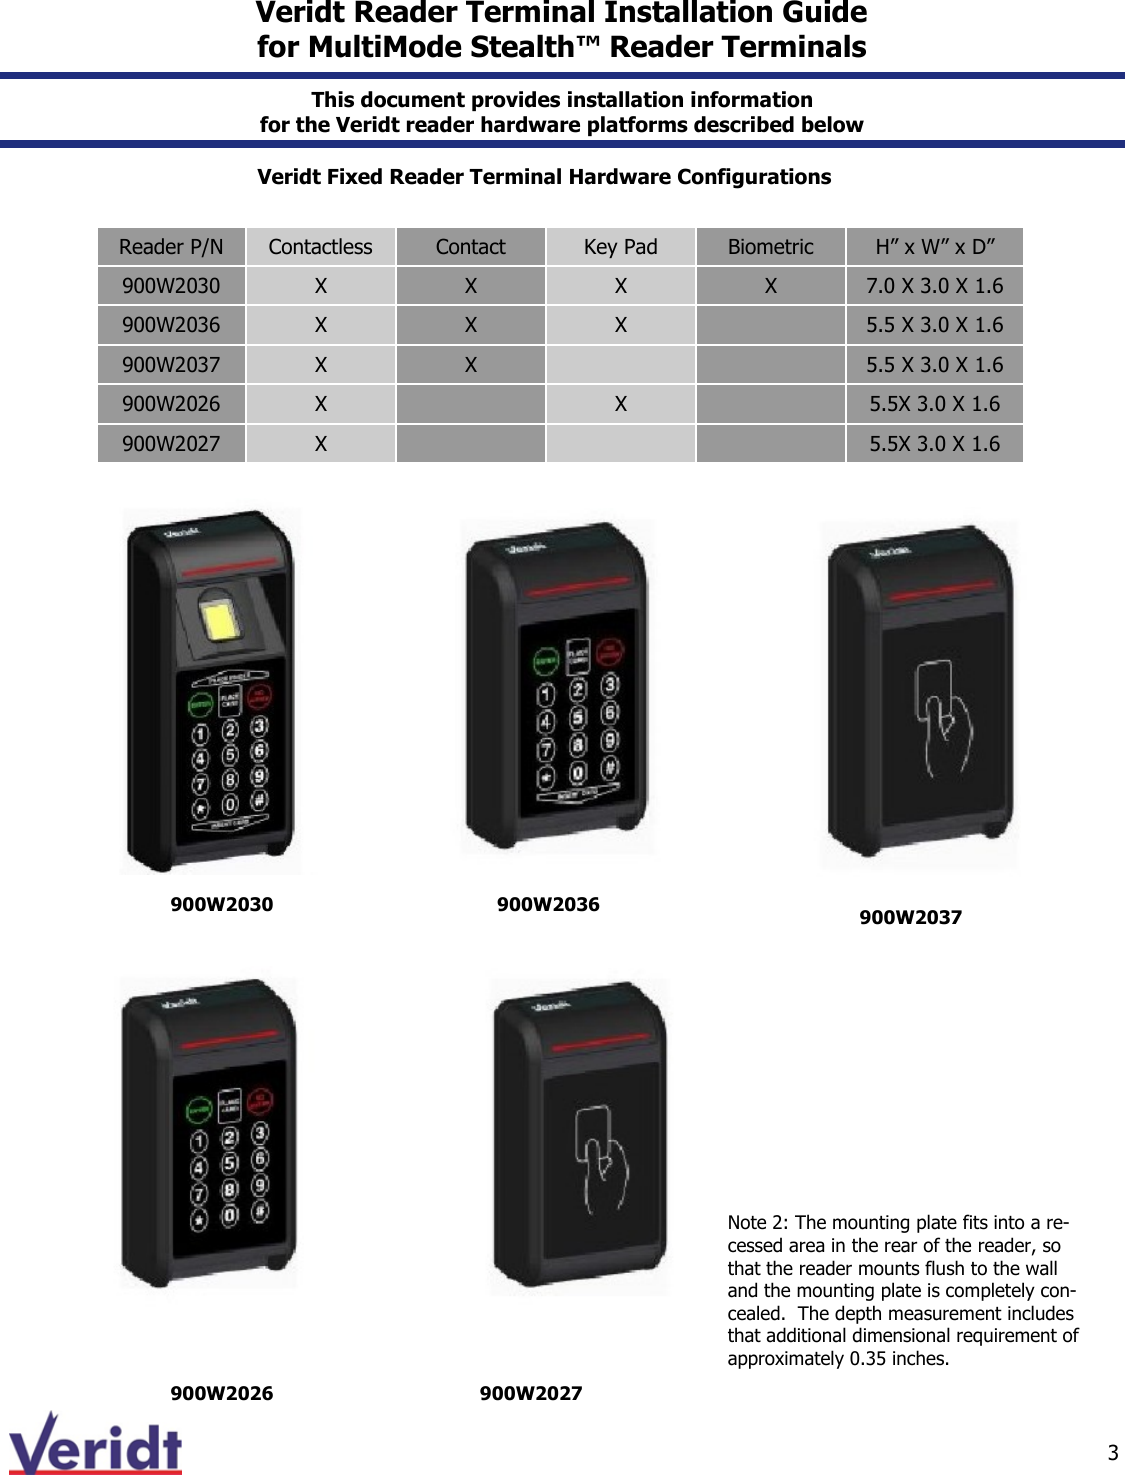  3  Veridt Reader Terminal Installation Guide  for MultiMode Stealth™ Reader Terminals Reader P/N  Contactless  Contact  Key Pad  Biometric  H” x W” x D” 900W2030  X  X  X  X  7.0 X 3.0 X 1.6 900W2036  X  X  X    5.5 X 3.0 X 1.6 900W2037  X  X      5.5 X 3.0 X 1.6 900W2026  X    X    5.5X 3.0 X 1.6 900W2027  X        5.5X 3.0 X 1.6   Veridt Fixed Reader Terminal Hardware Configurations This document provides installation information  for the Veridt reader hardware platforms described below 900W2026 900W2030 900W2027 900W2036  Note 2: The mounting plate fits into a re-cessed area in the rear of the reader, so that the reader mounts flush to the wall and the mounting plate is completely con-cealed.  The depth measurement includes that additional dimensional requirement of approximately 0.35 inches. 900W2037 